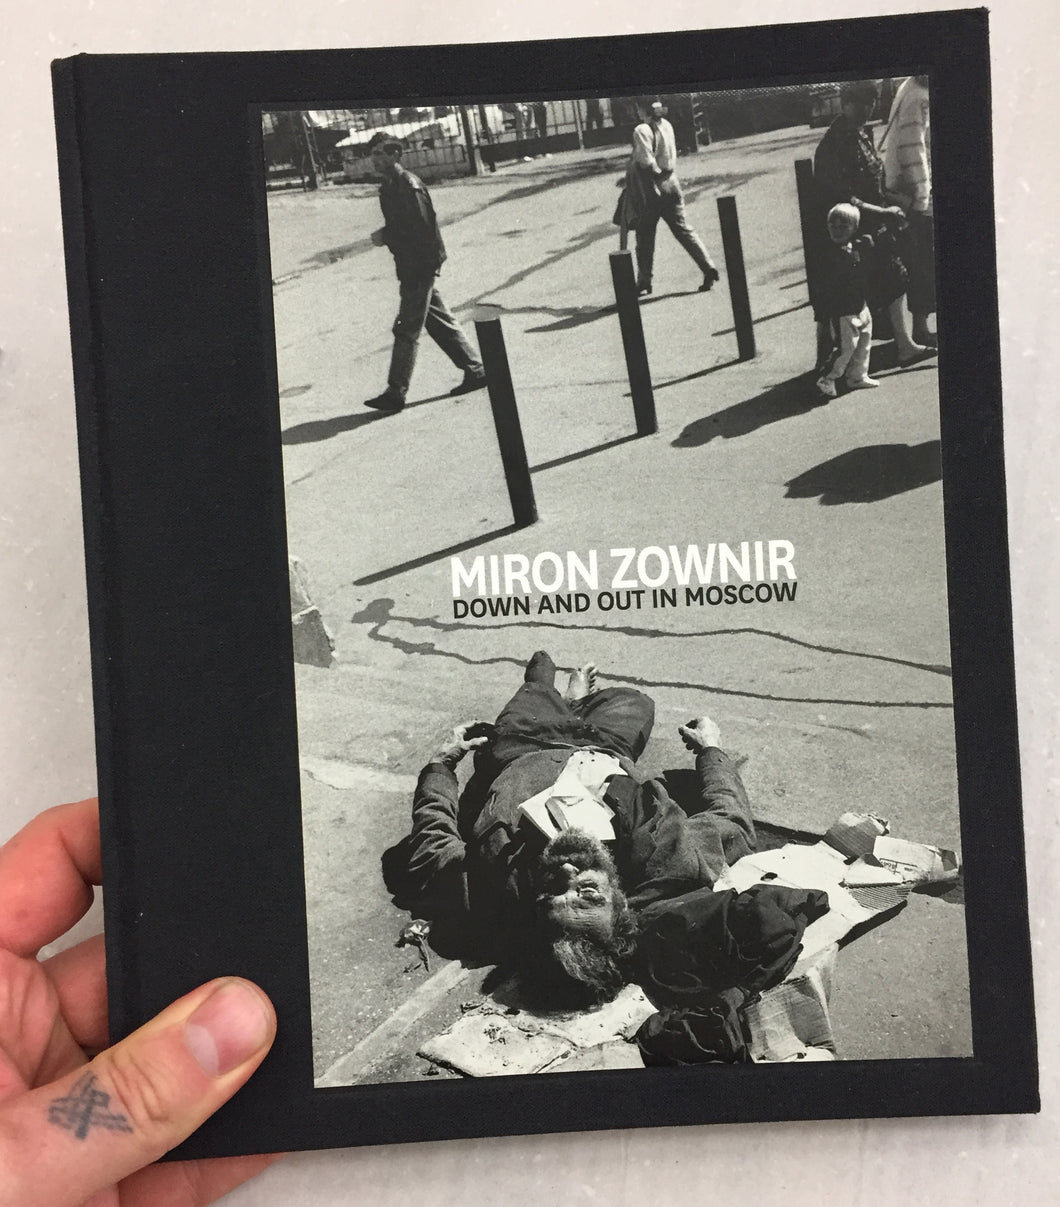 Down and out in Moscow | Miron Zownir (Pogo Books)